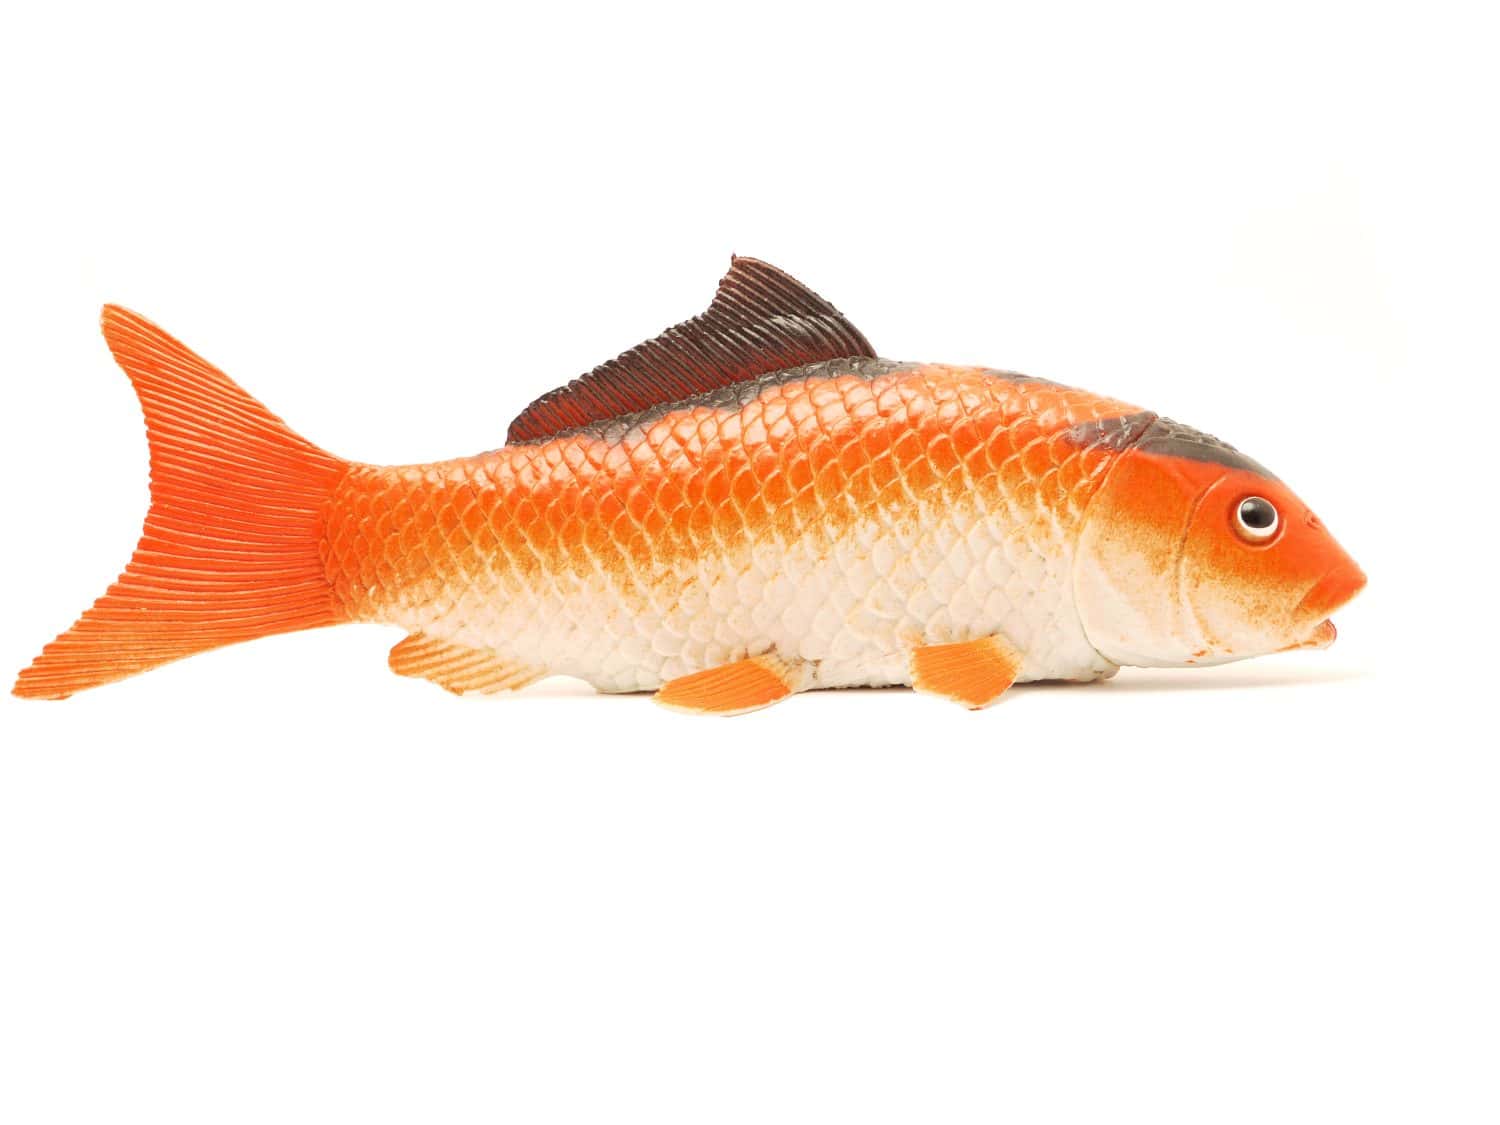 Figure of fish on a white background